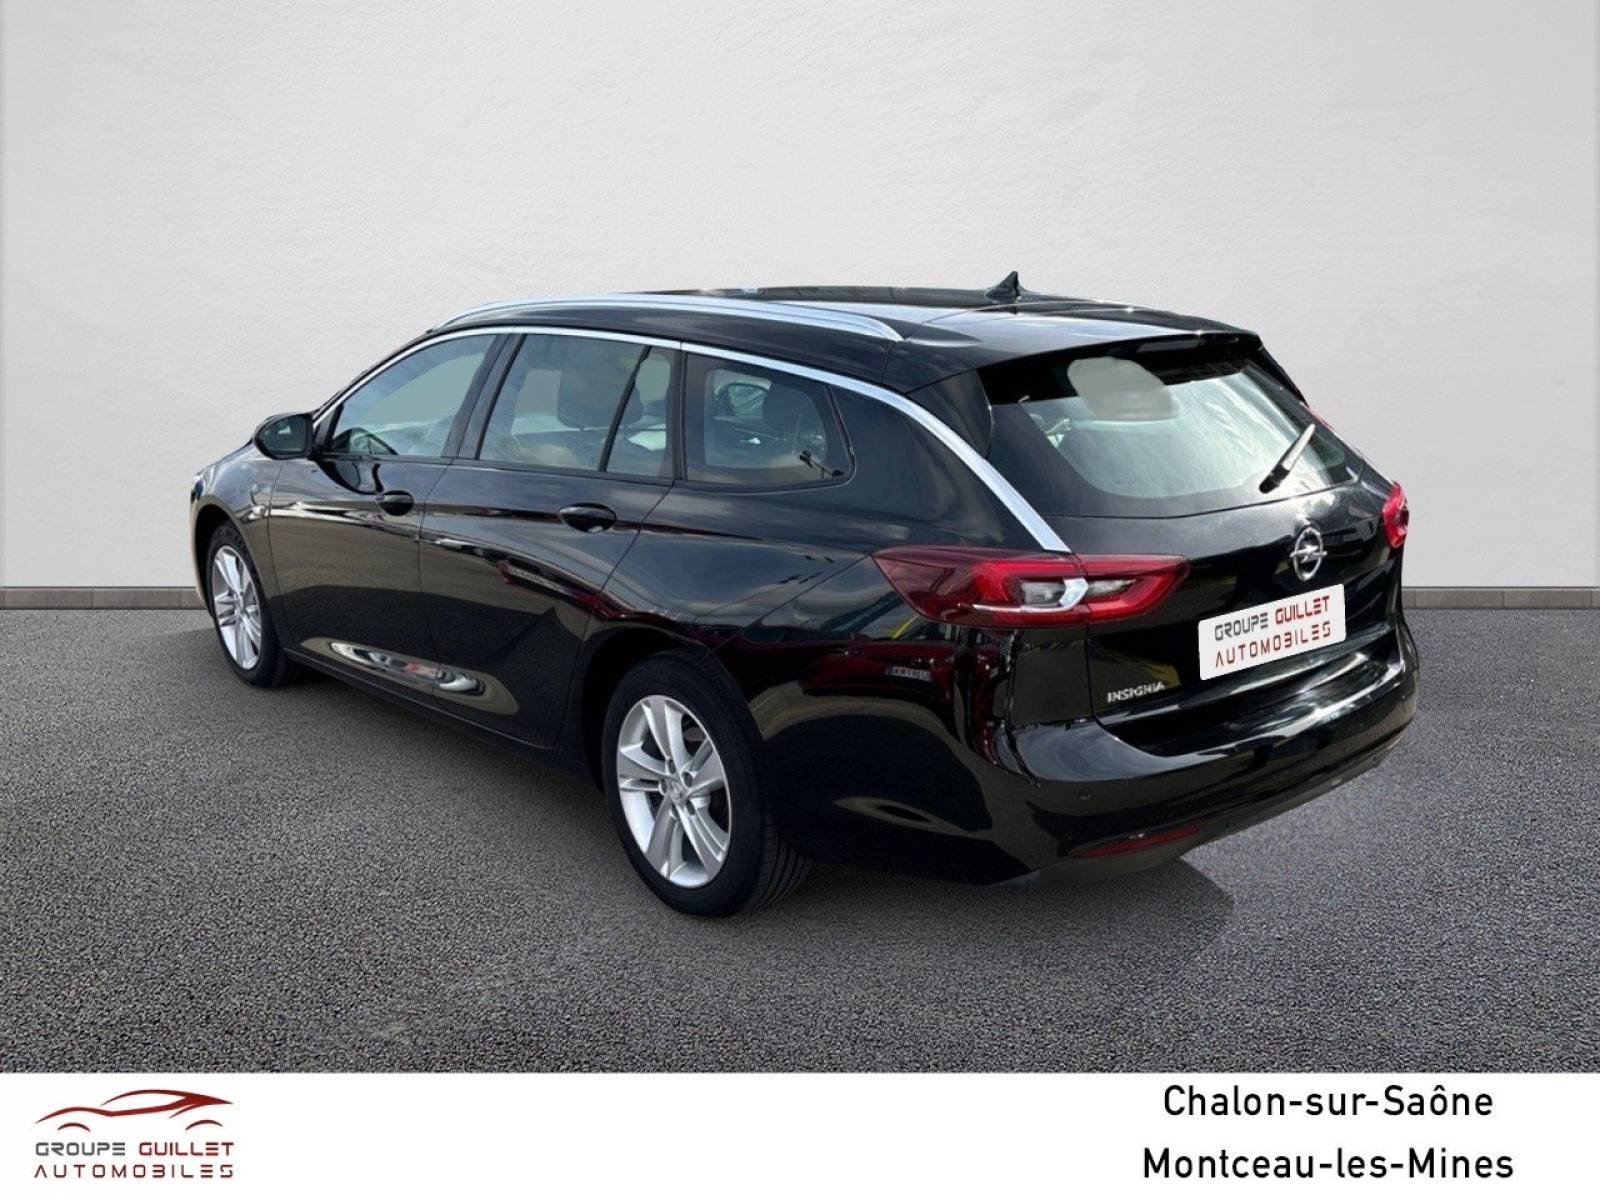 OPEL Insignia Sports Tourer 1.5 Diesel 122 ch - véhicule d'occasion - Groupe Guillet - Opel Magicauto Chalon - 71380 - Saint-Marcel - 7